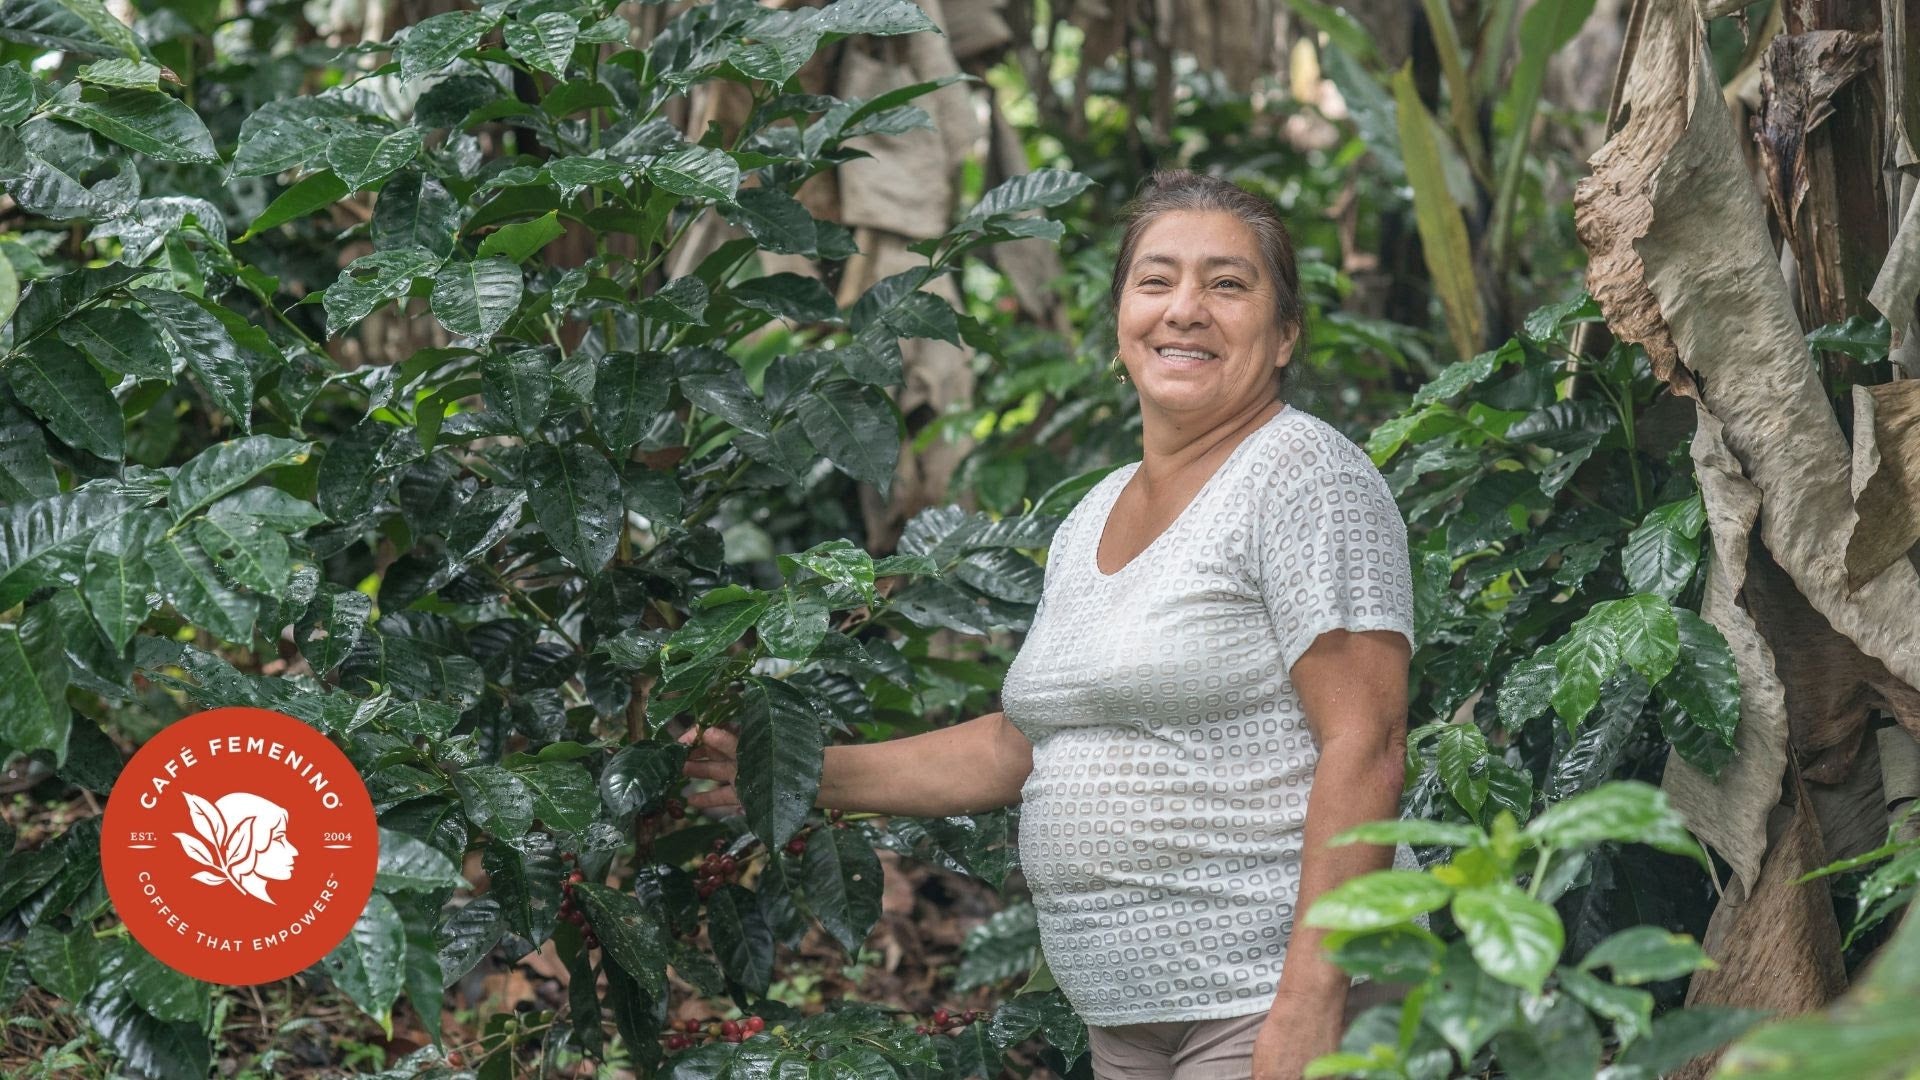 Café Femenino combines specialty coffee with social change for women, including these farmers from Inza, Cuaca and the Café Femenino Colombia Program. Image courtesy of Fair Trade USA.